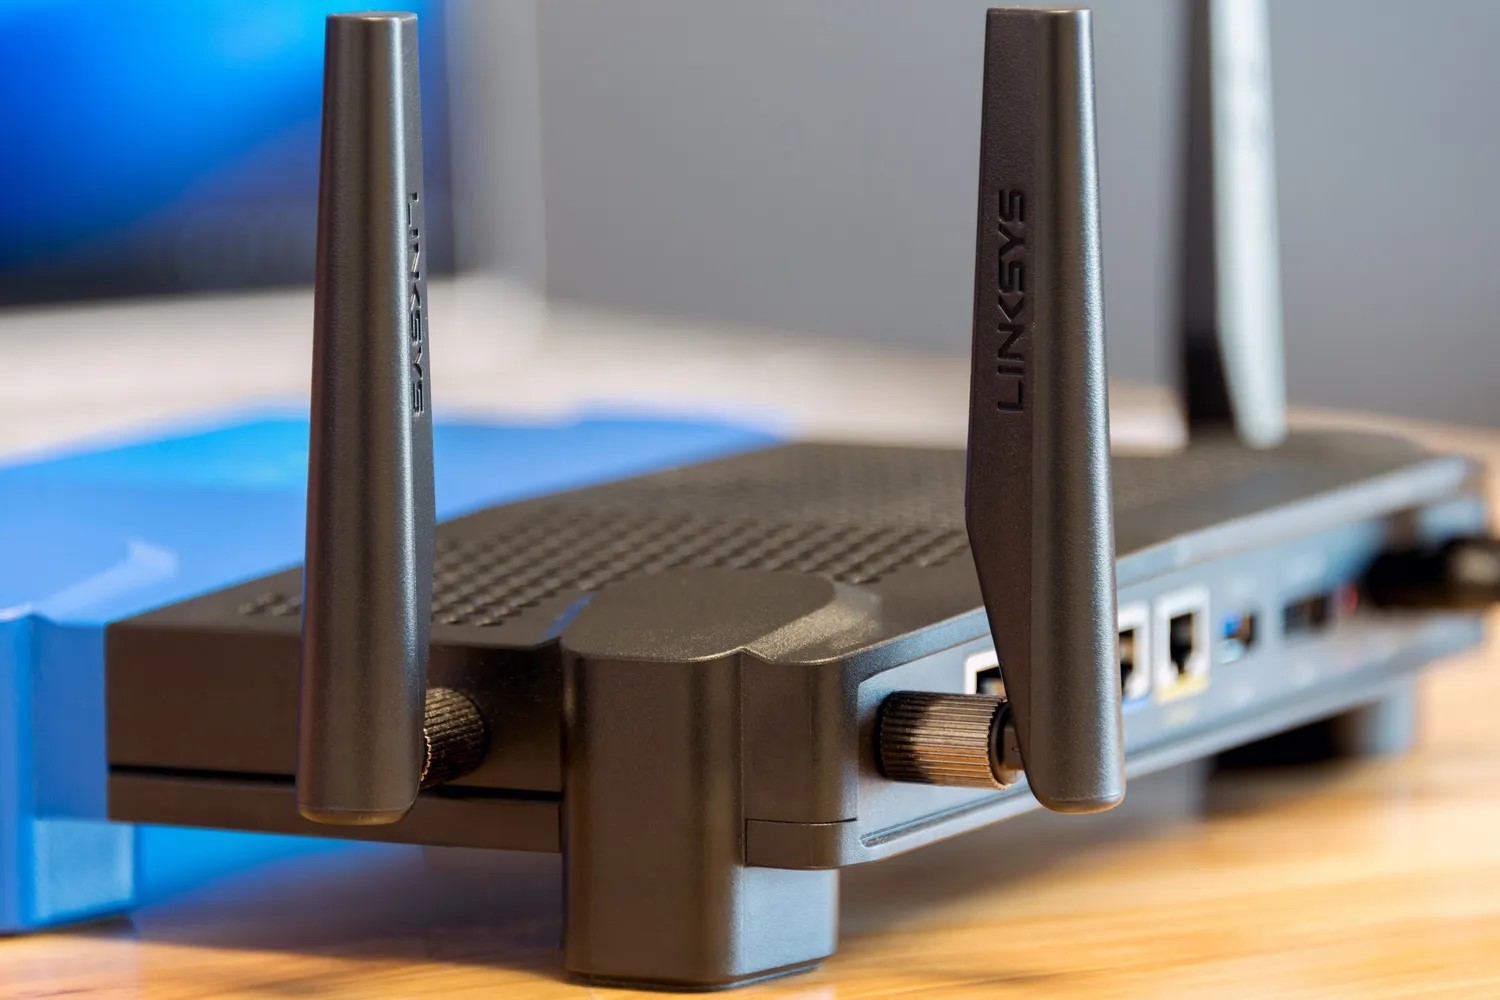 How To Connect Antenna To Wi-Fi Router